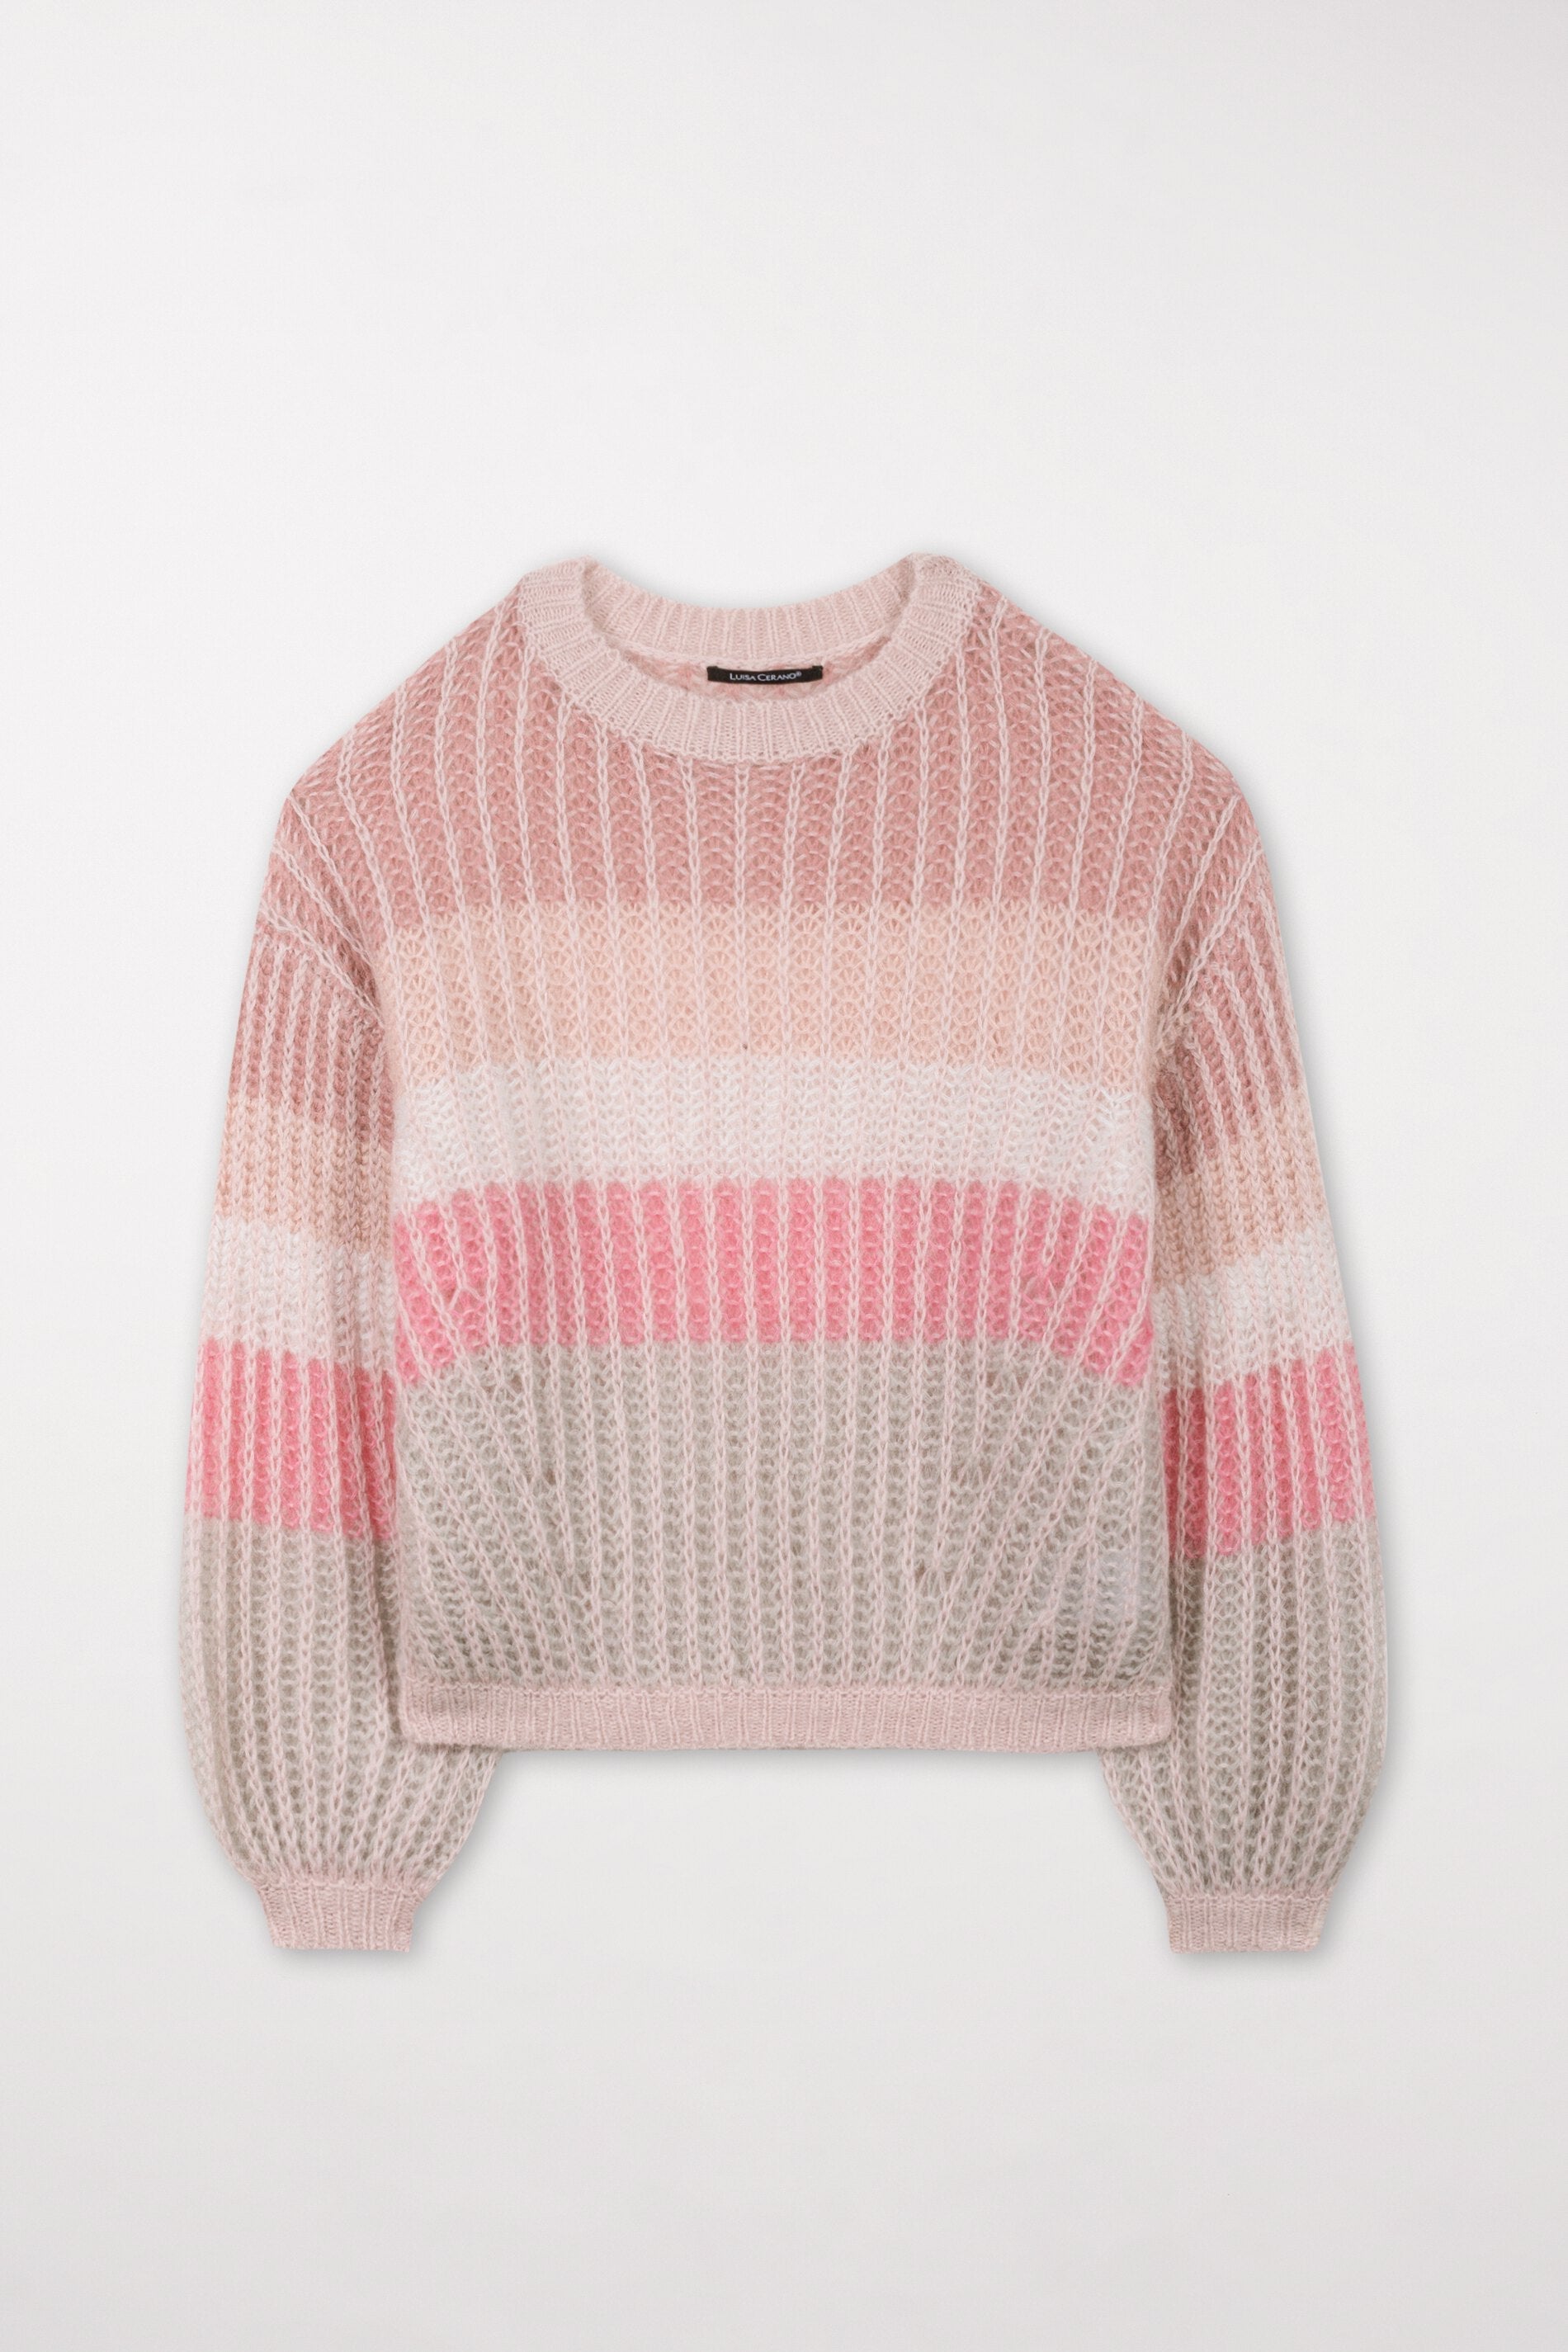 LUISA CERANO-OUTLET-SALE-Ripp-Pullover aus Mohair-Mix-Strick-34-multi-by-ARCHIVIST